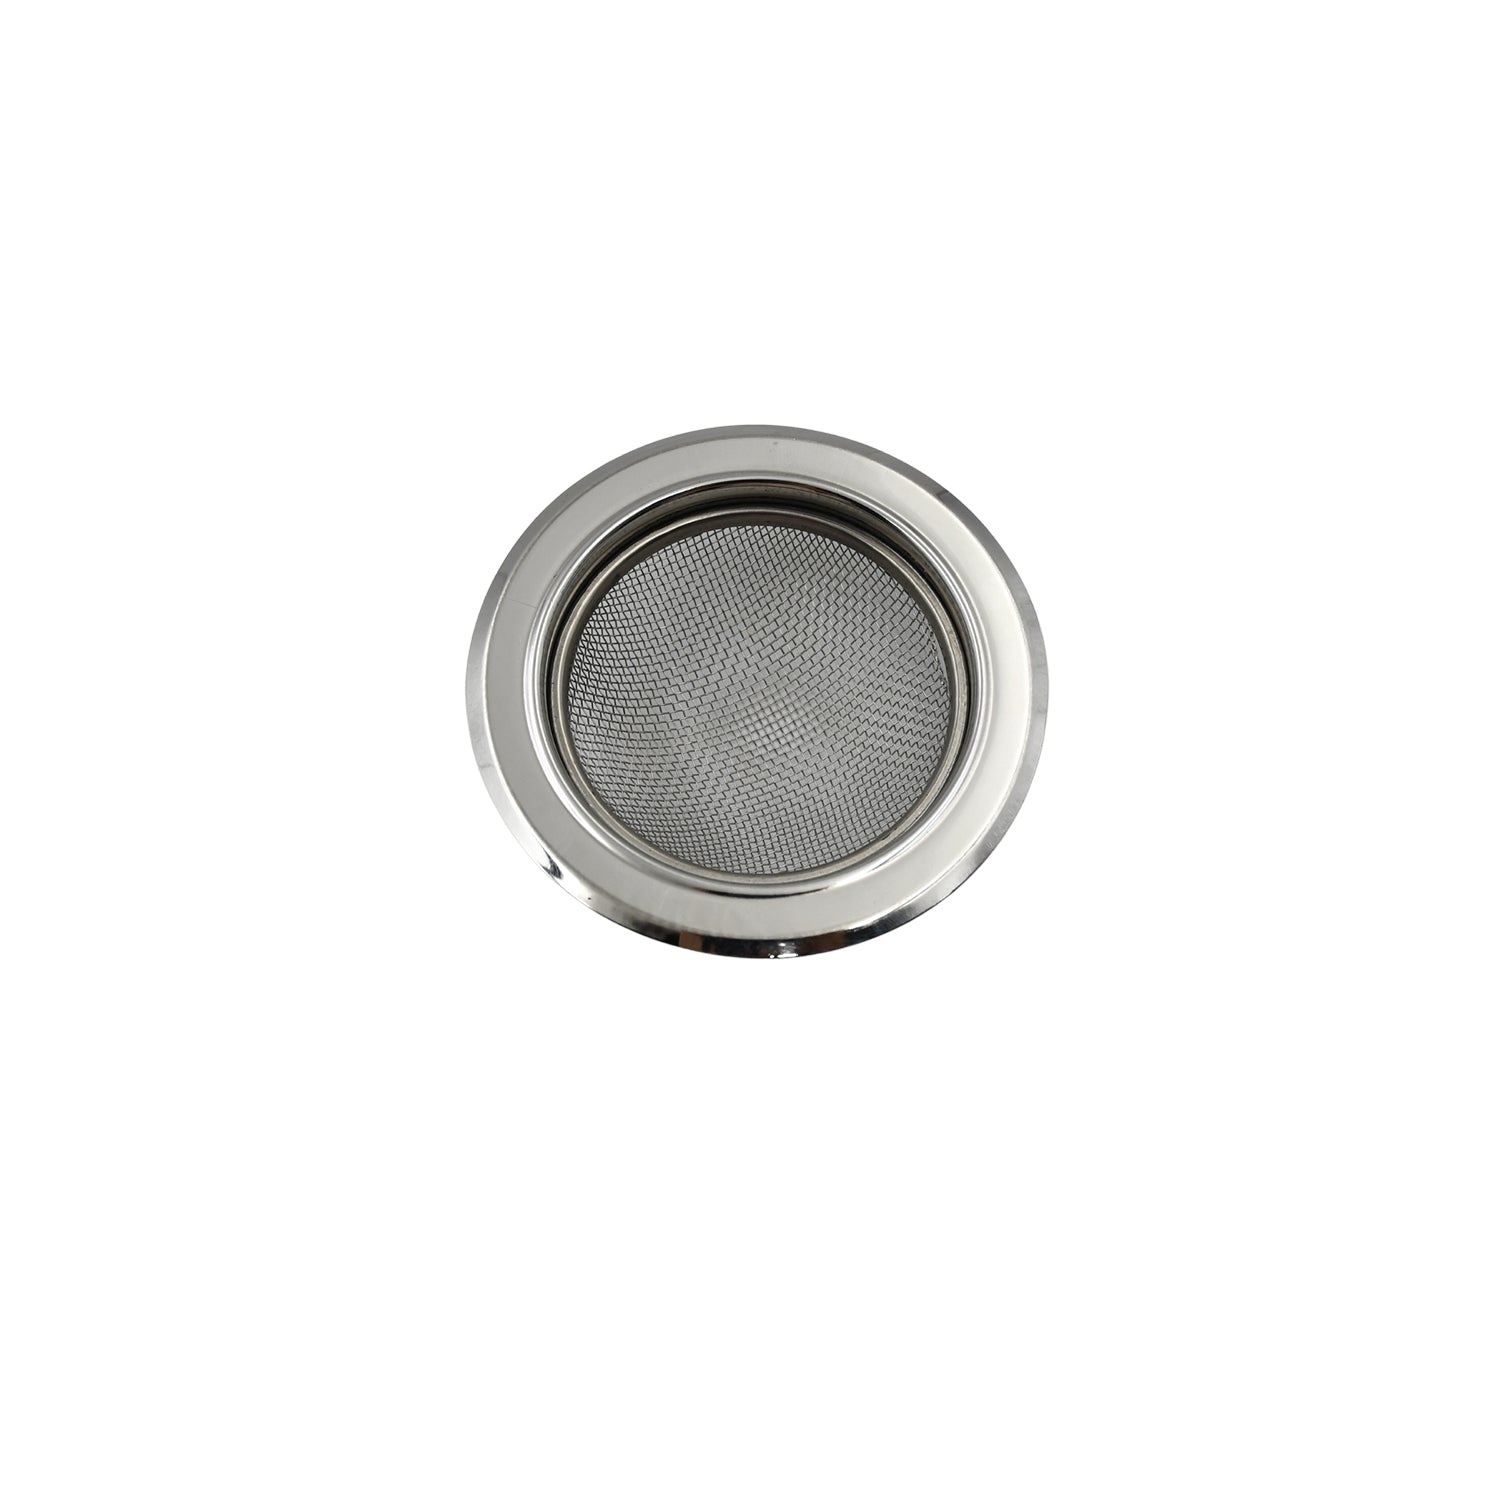 0791a Small Stainless Steel Sink Strainer Kitchen Drain Basin Filter Stopper Drainer